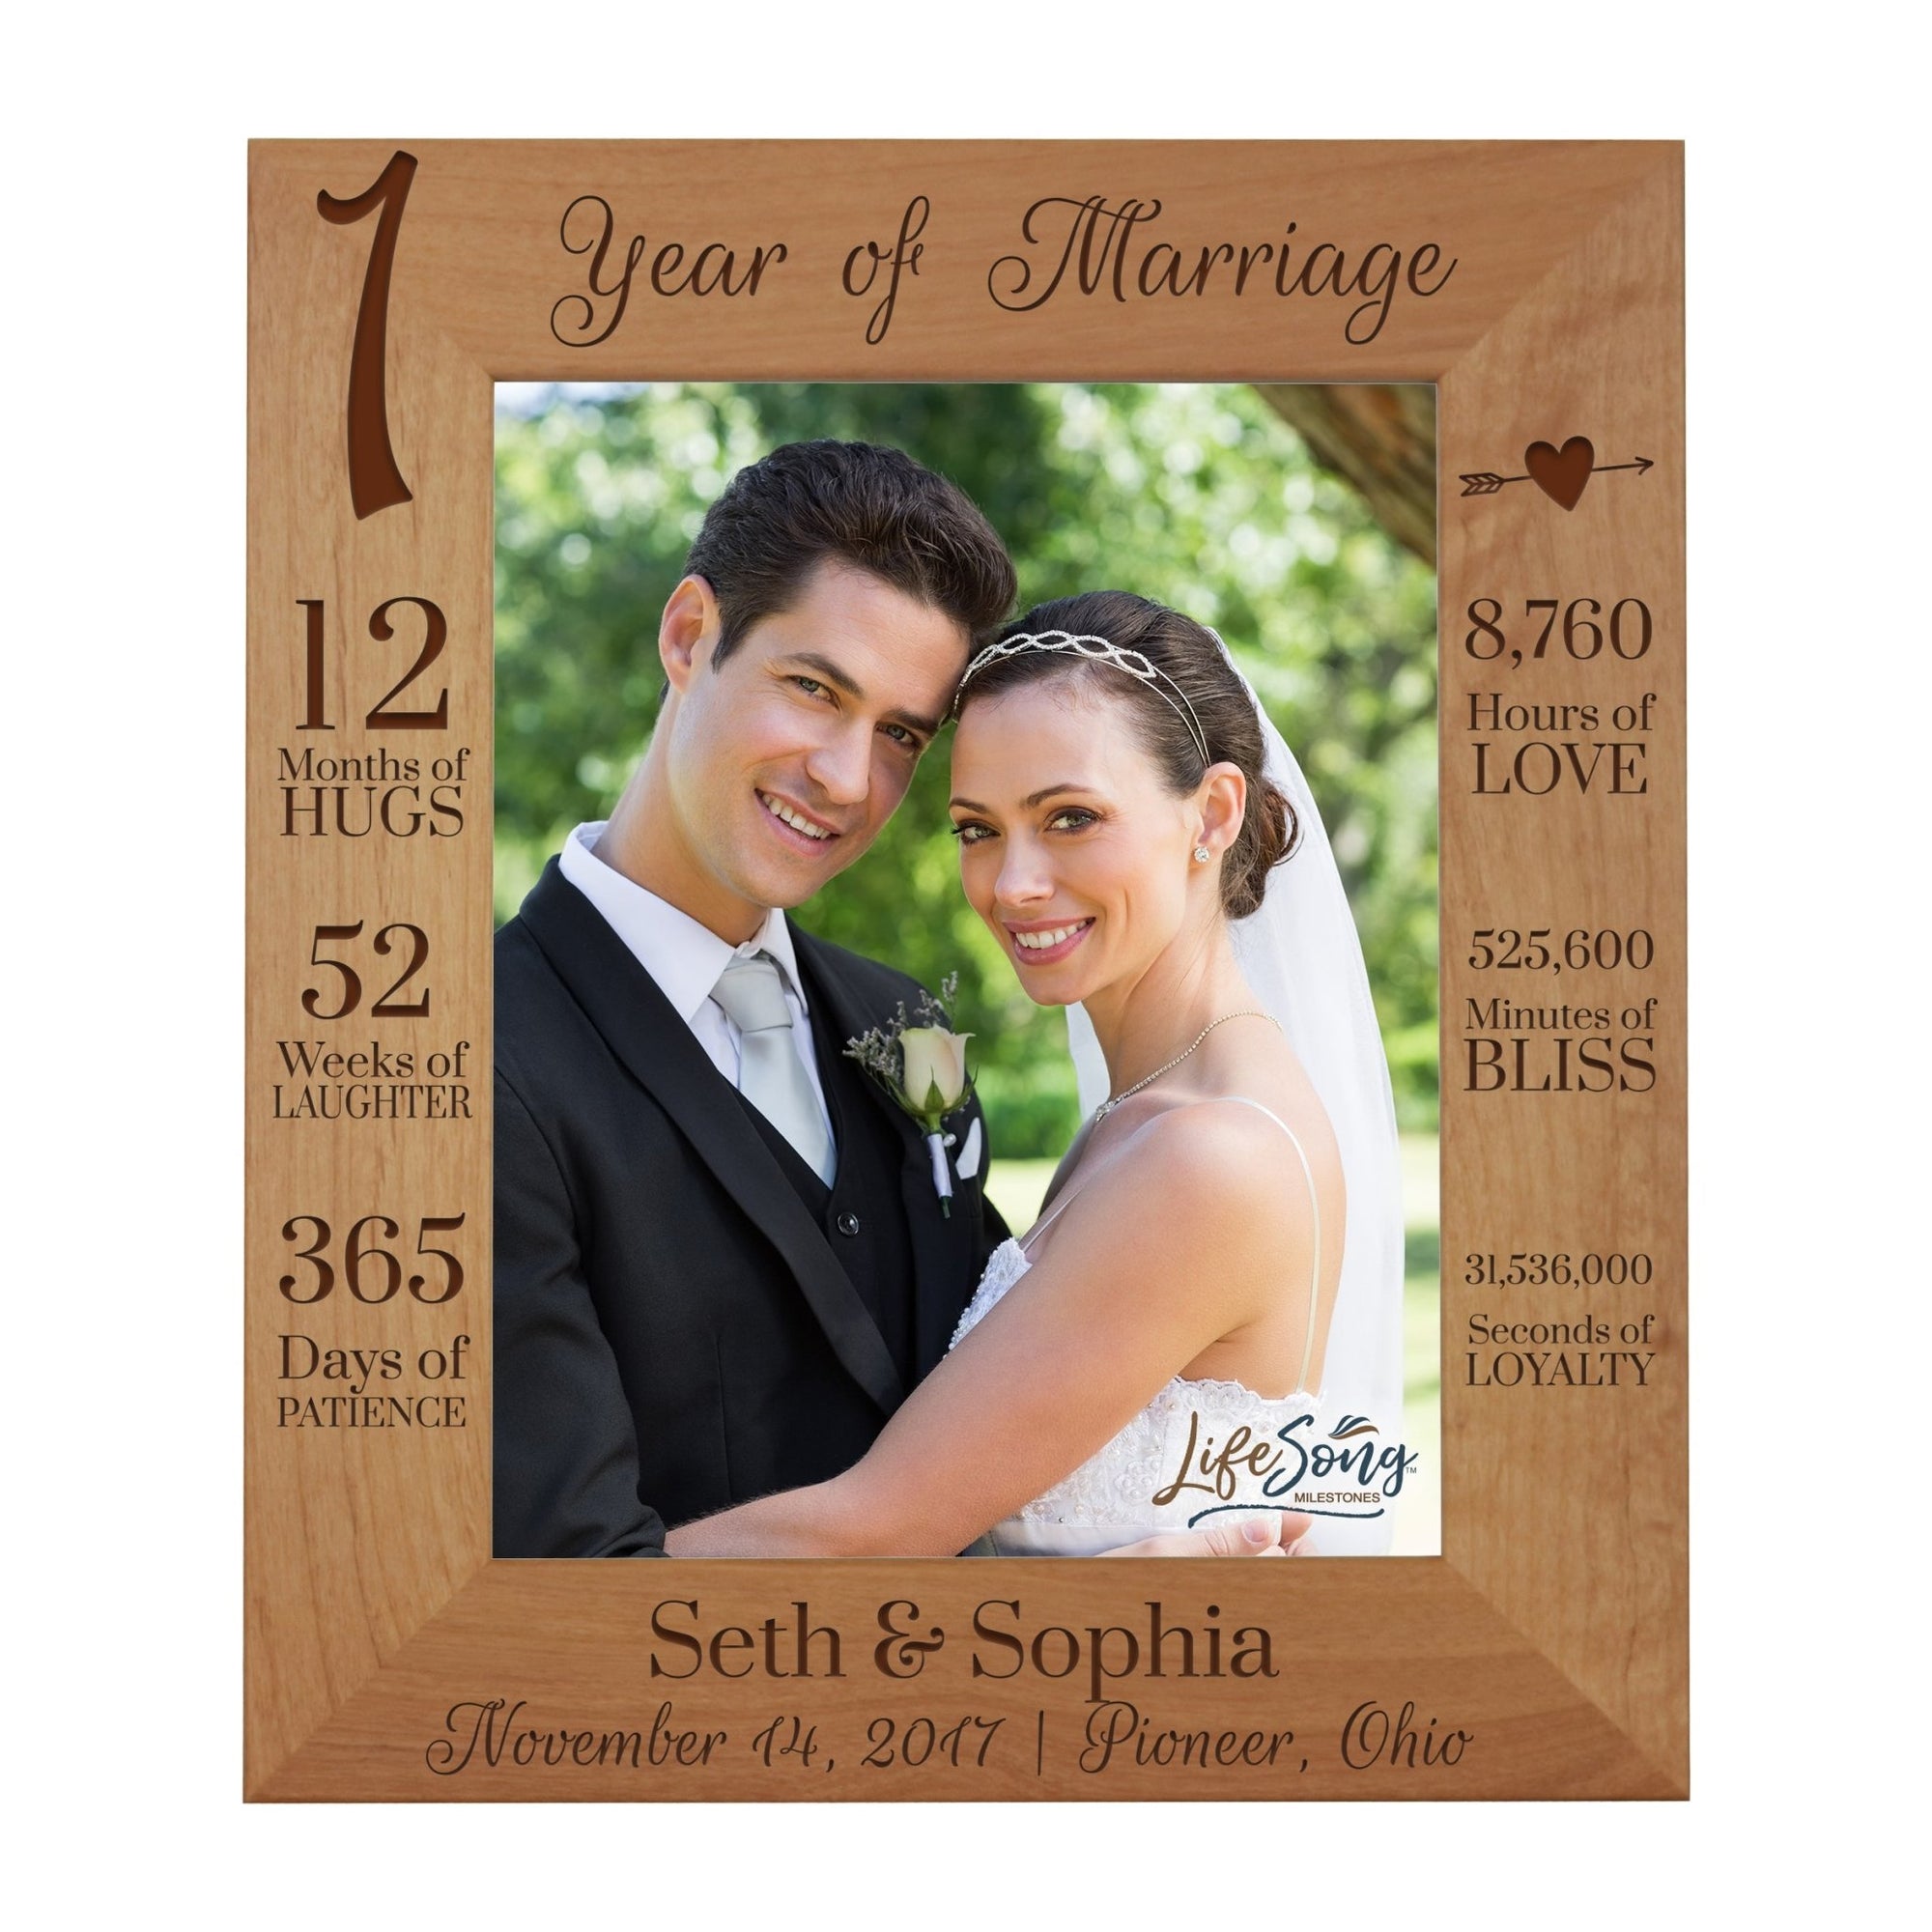 Lifesong Milestones Personalized Couples 1st Wedding Anniversary Photo Frame Home Decor Gift Ideas 